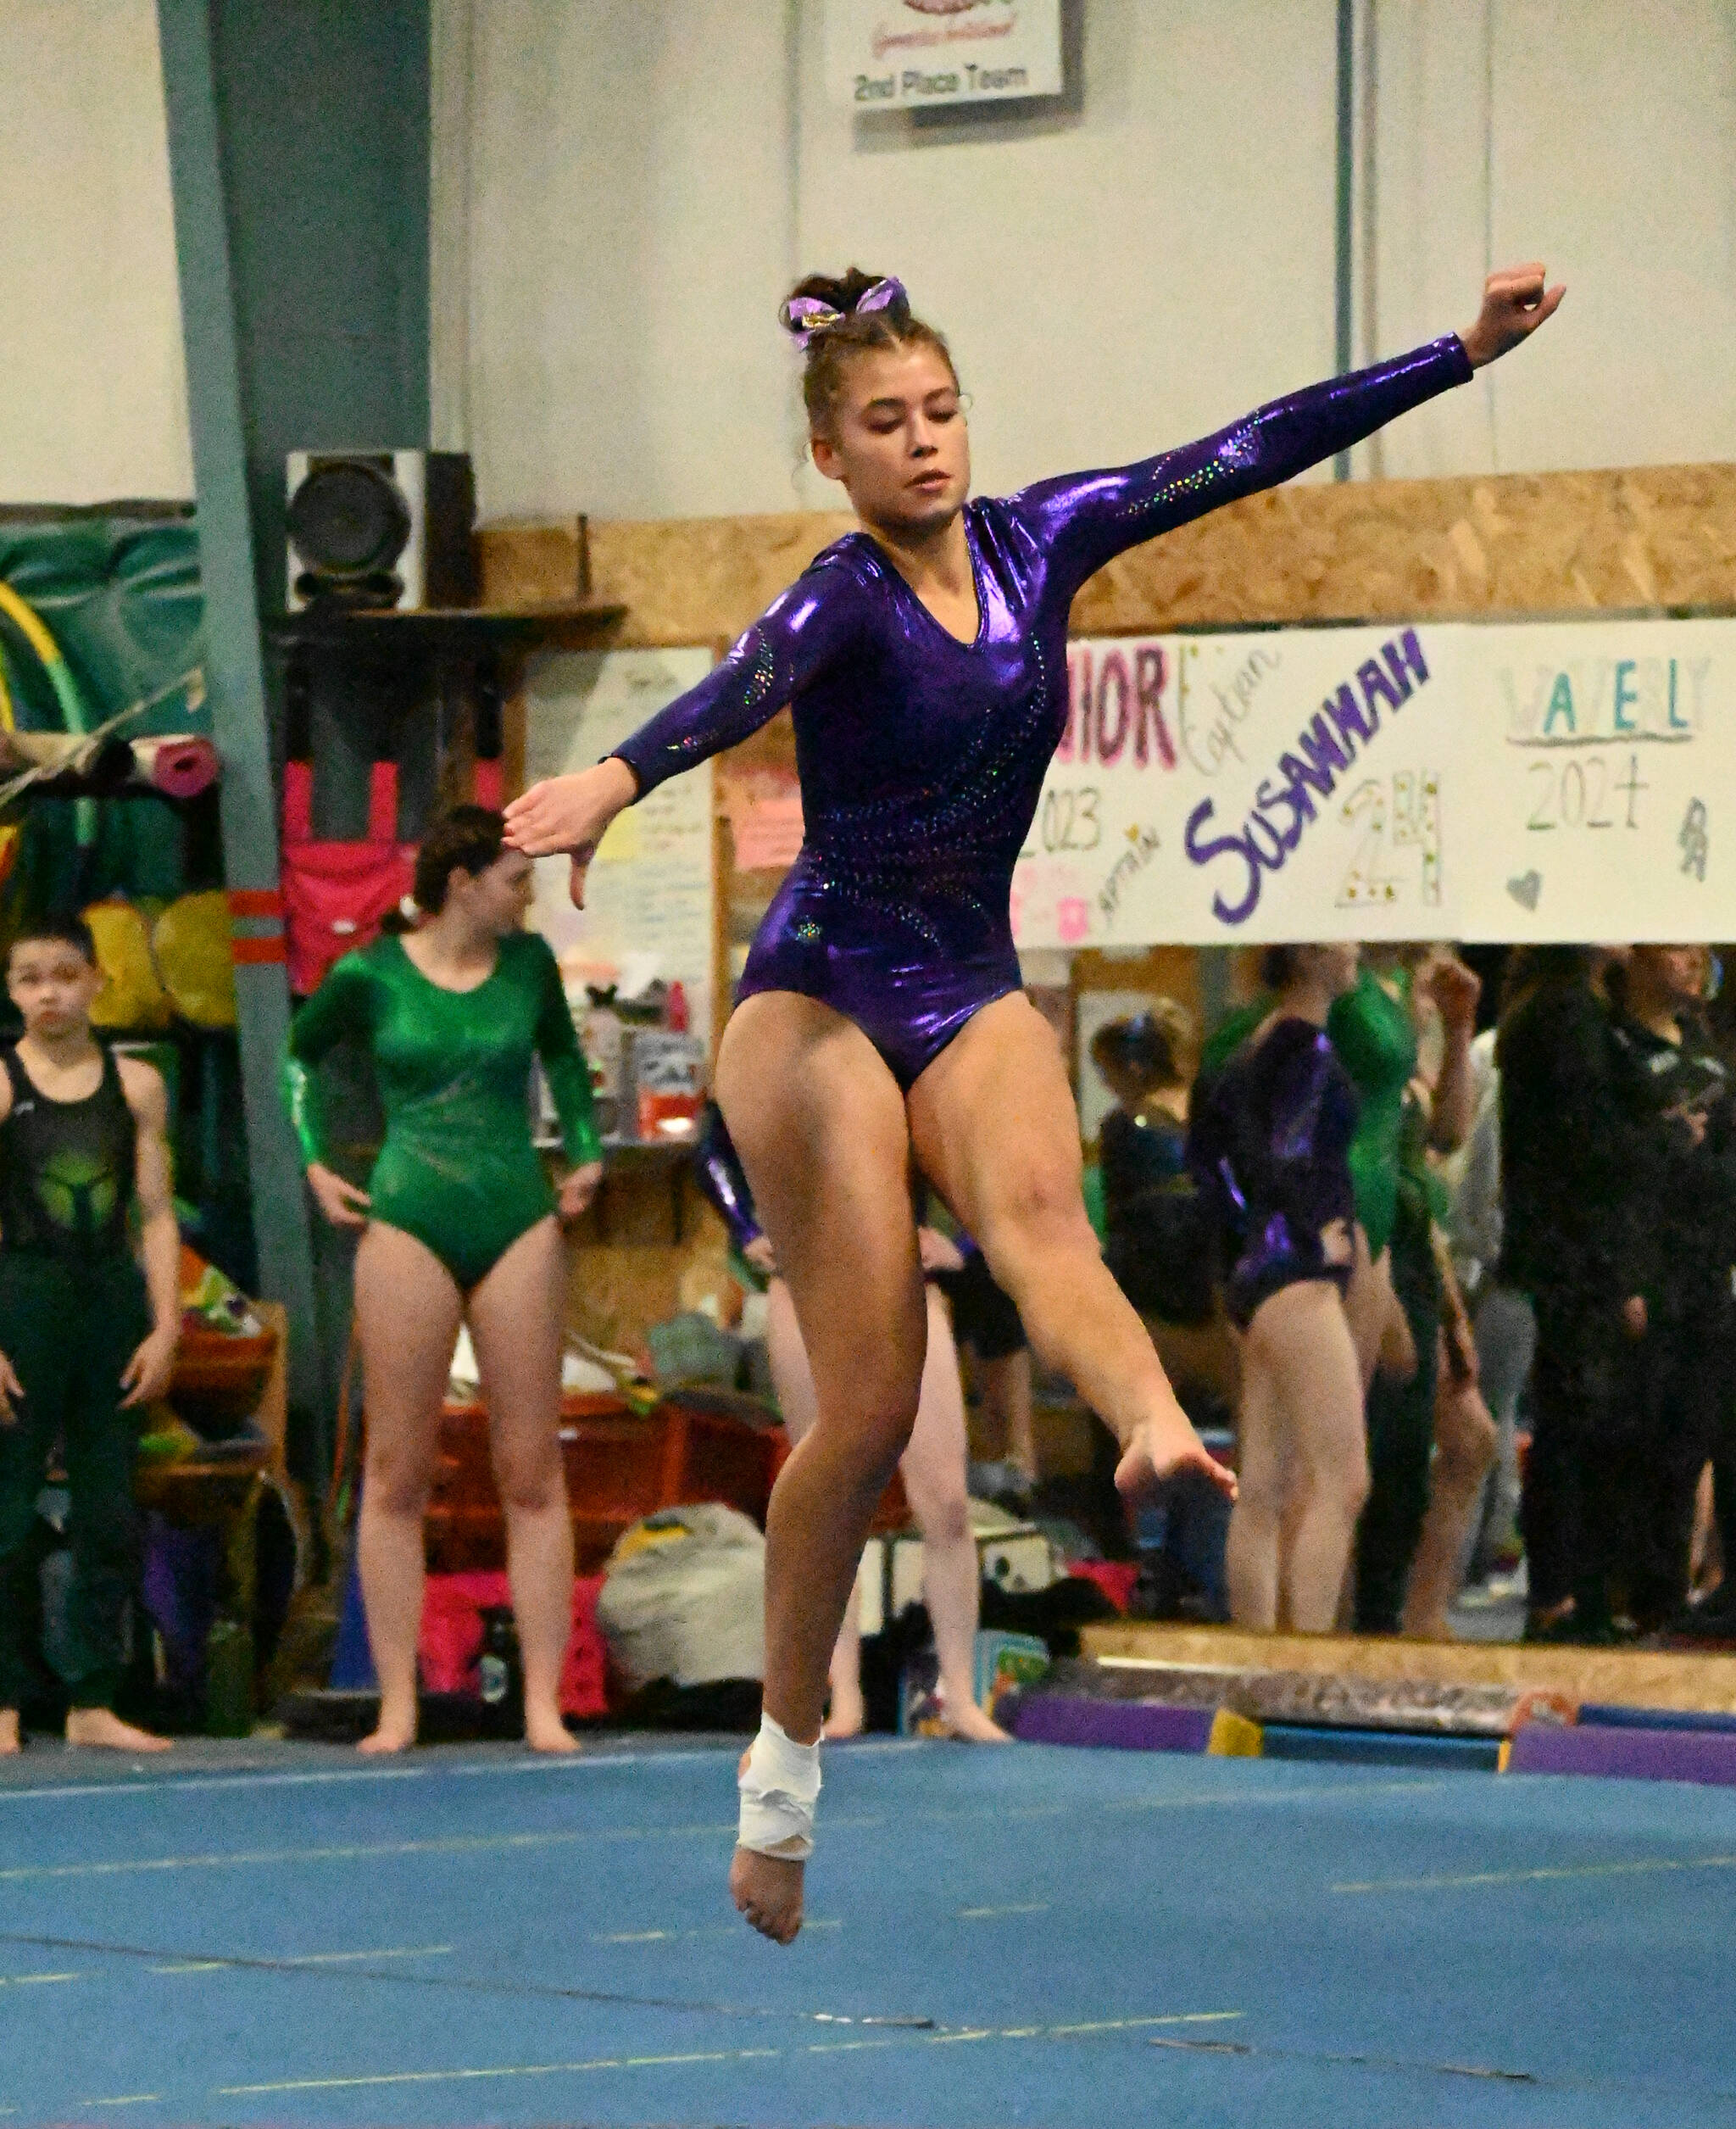 Sequim Gazette photo by Michael Dashiell / Sequim’s Amara Brow, a district meet qualifier last season, competes in the floor exercise portion of a Jan. 11 home league meet against Bainbridge. She placed eighth with 6.9 points.